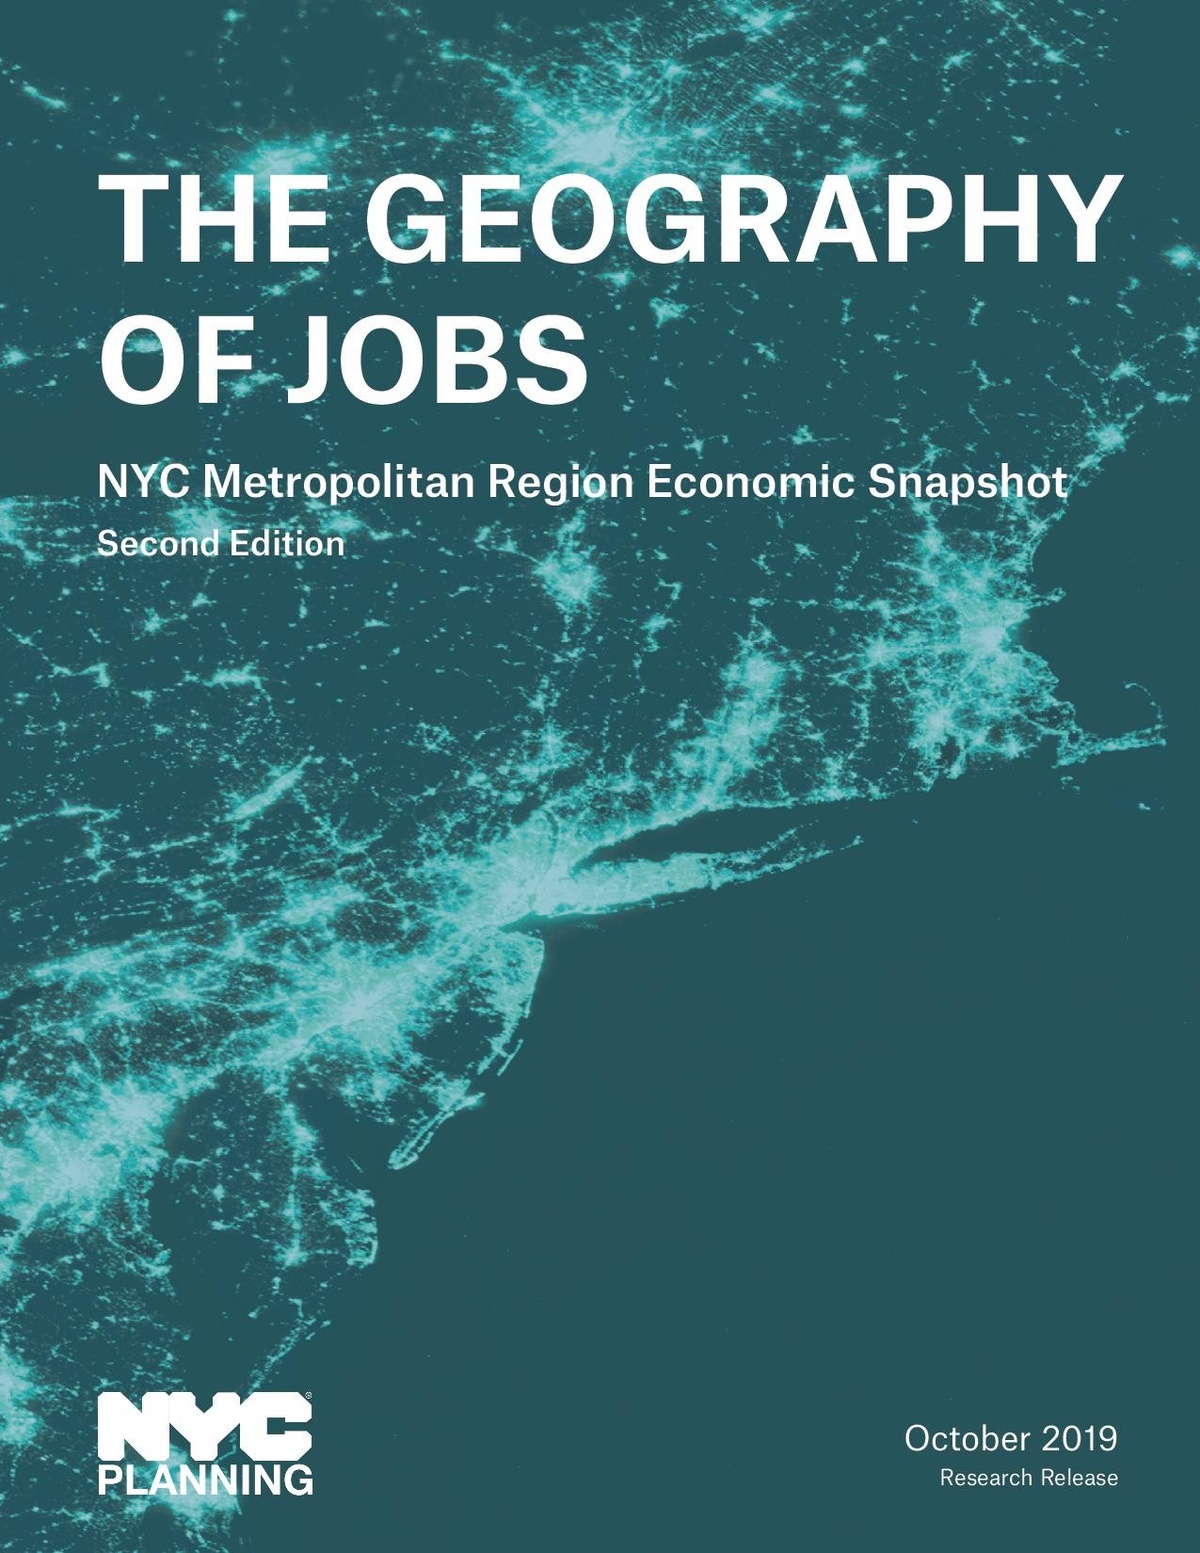 nyc-geography-jobs2-1019-page-001.jpg